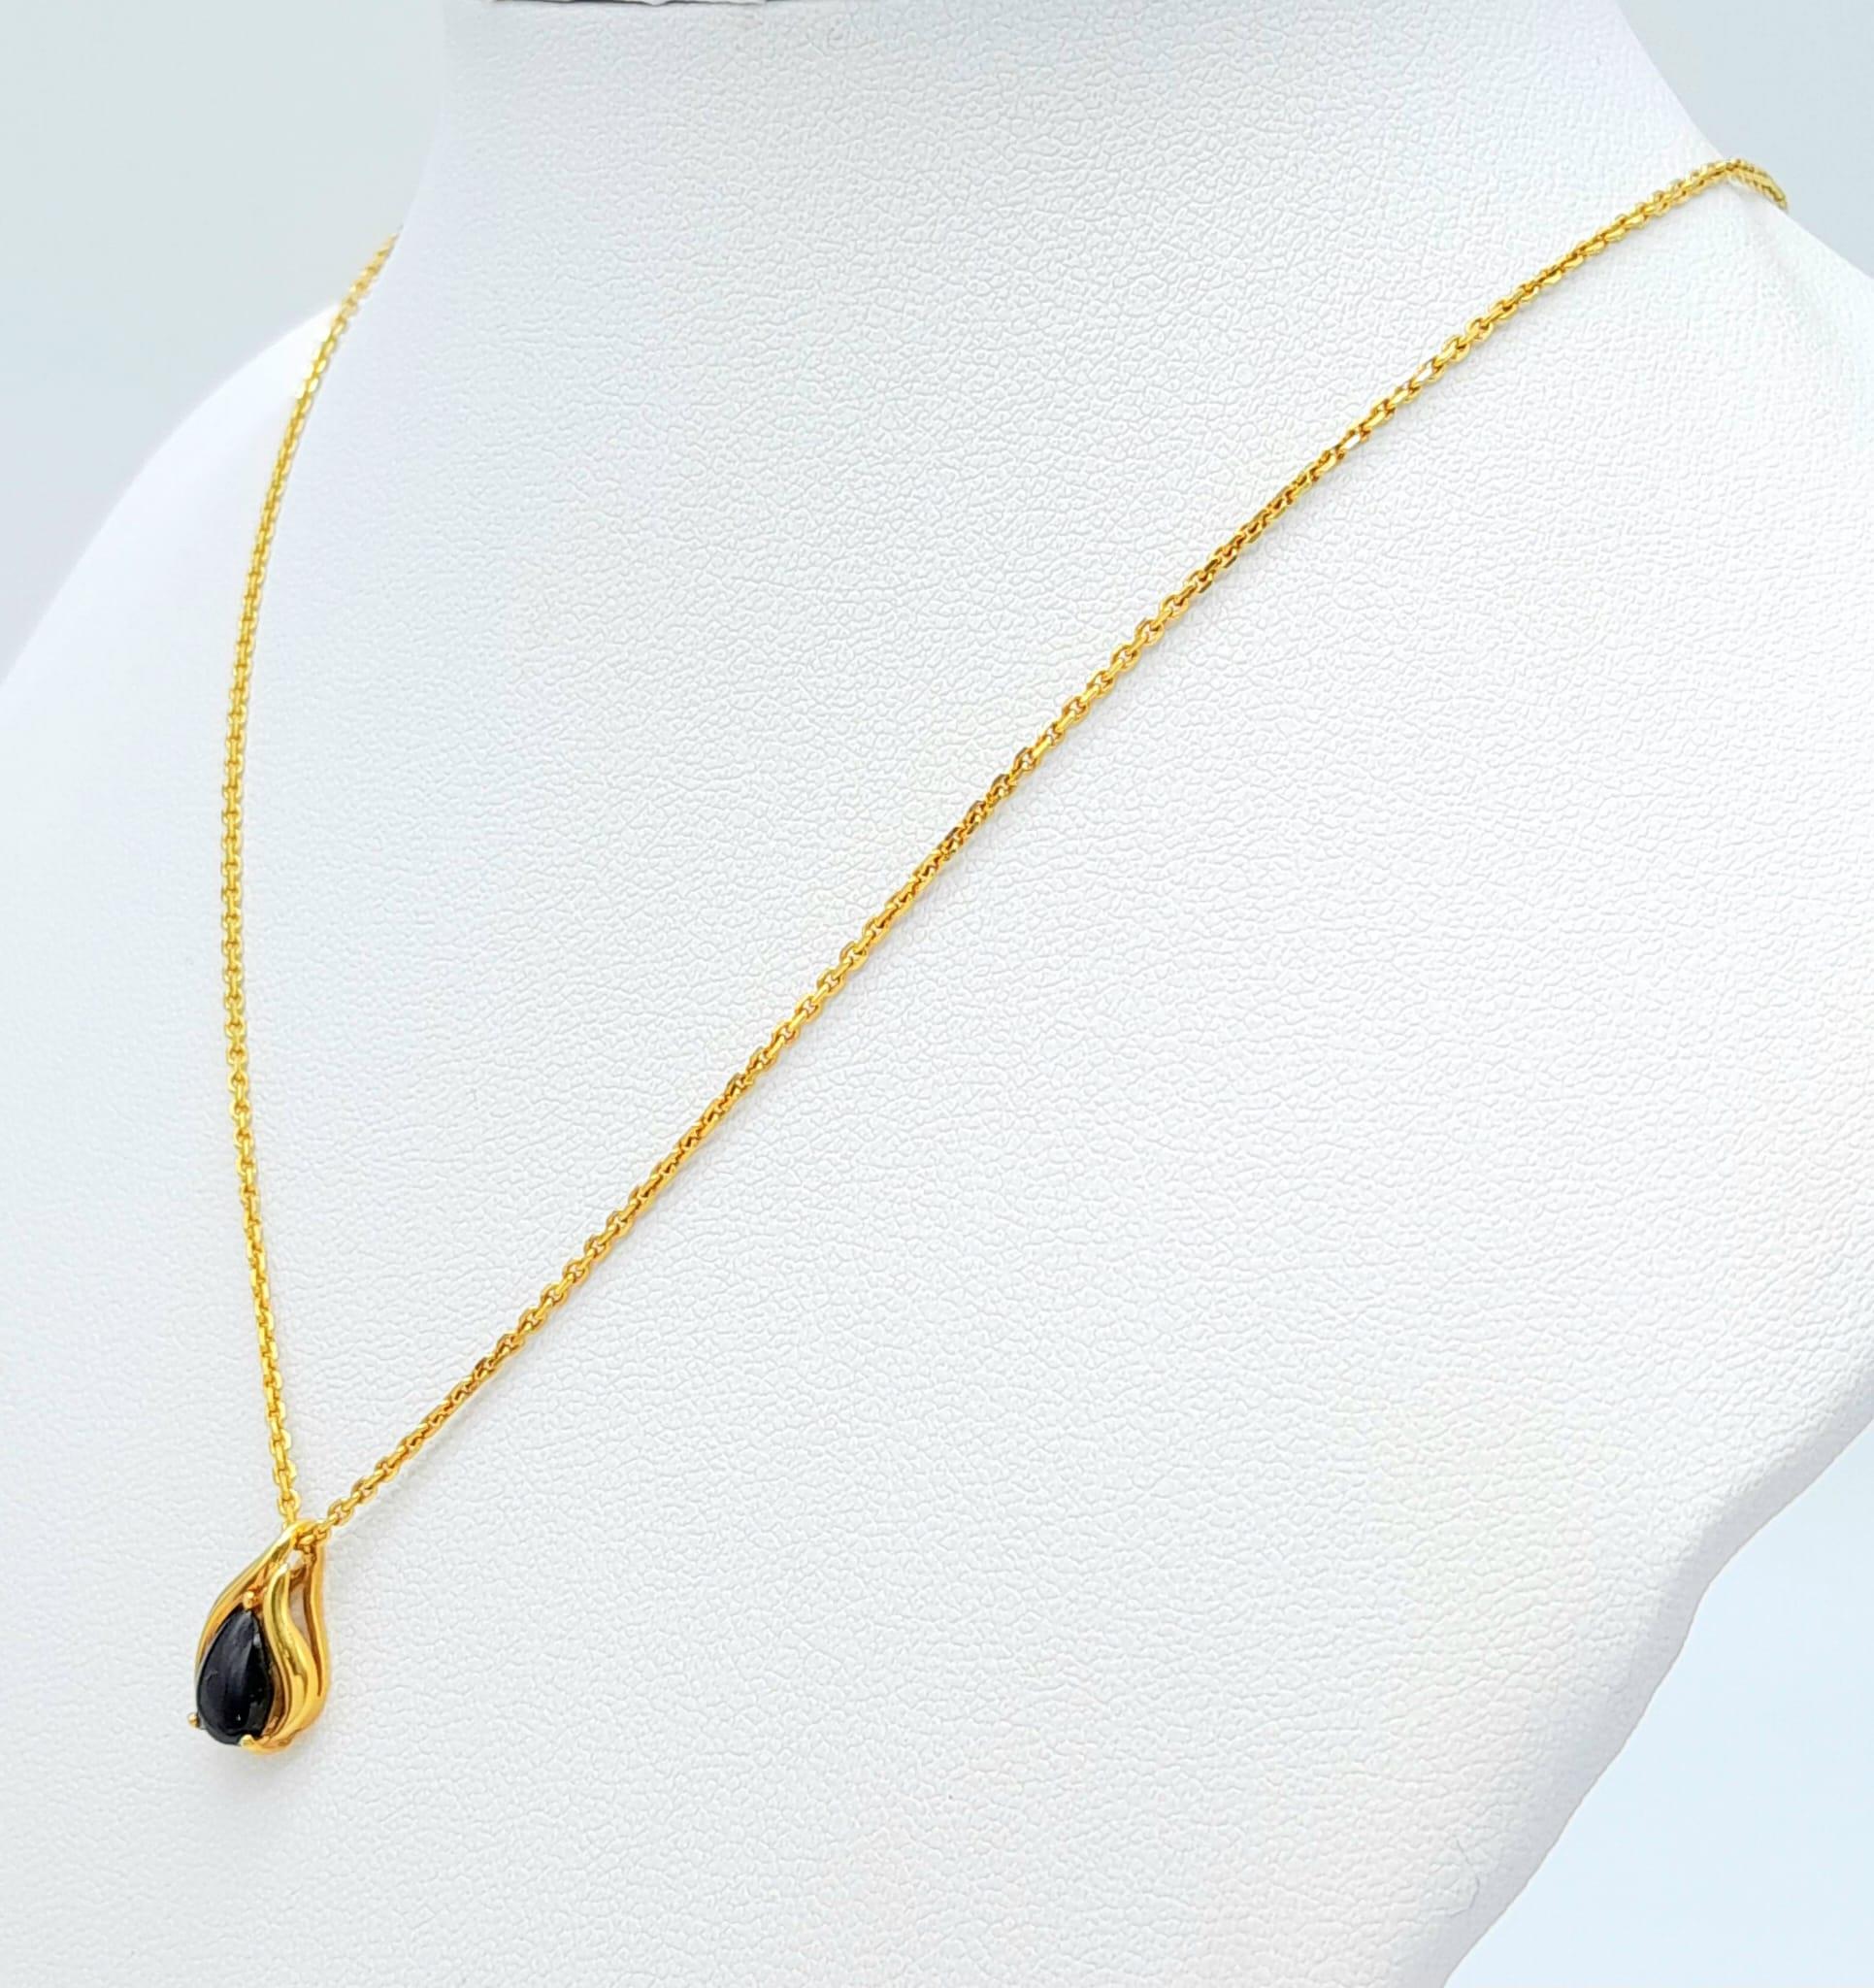 A 9 K yellow gold chain necklace with a black onyx pendant, chain length: 40 cm, total weight: 2.5 - Image 2 of 4